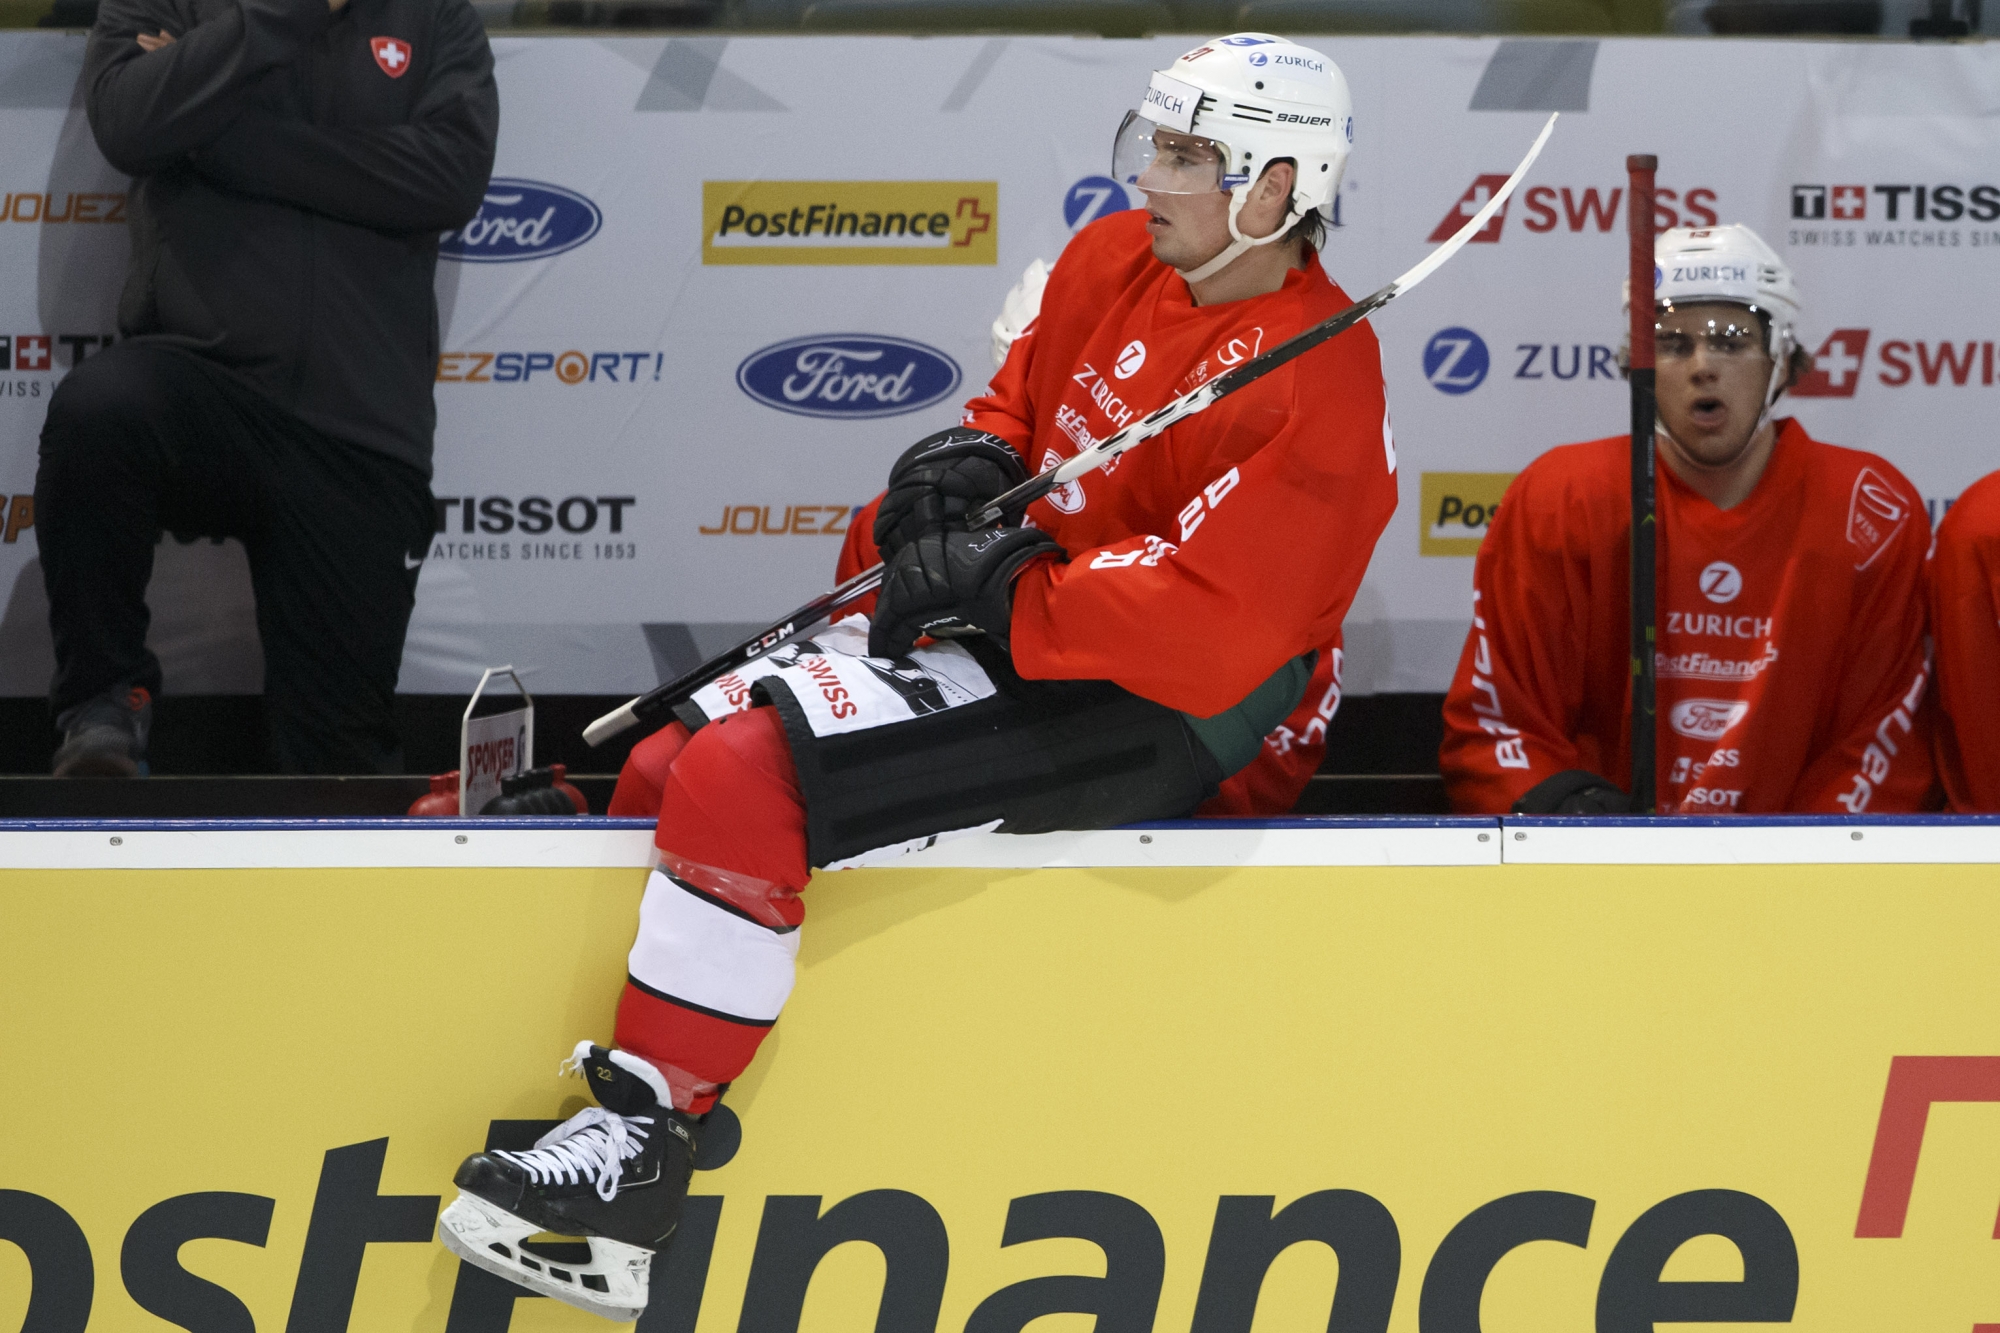 Switzerland's forward Kevin Fiala, left, jumps over the board past his teammate forward Nico Hischier, right, during a training camp of Swiss national hockey team ahead the IIHF 2018 World Championship, at the ice stadium Les Vernets, in Geneva, Switzerland, Tuesday, April 23, 2019. (KEYSTONE/Salvatore Di Nolfi) SWITZERLAND ICE HOCKEY WM 2019 TEAM SWITZERLAND TRAINING